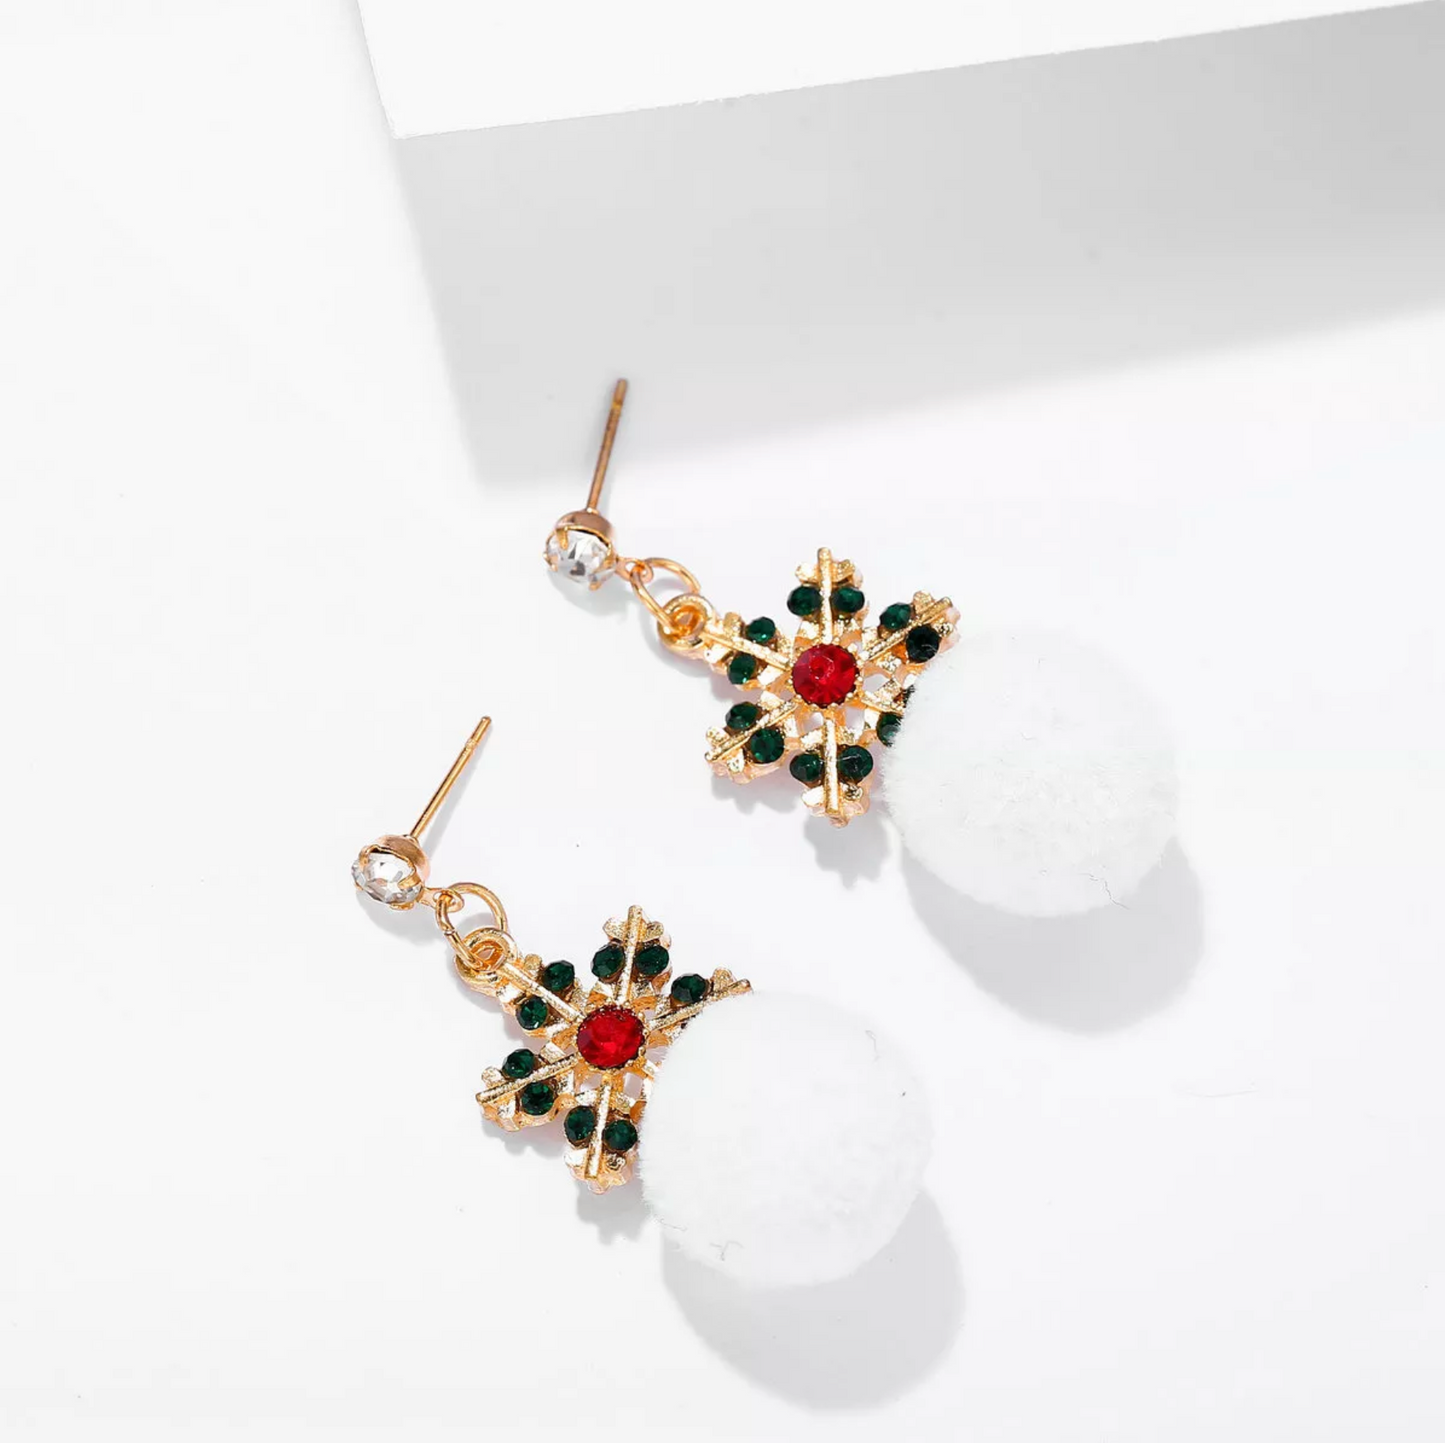 Red & Green Crystal Snowflake Drop Earrings With White Pom Pom